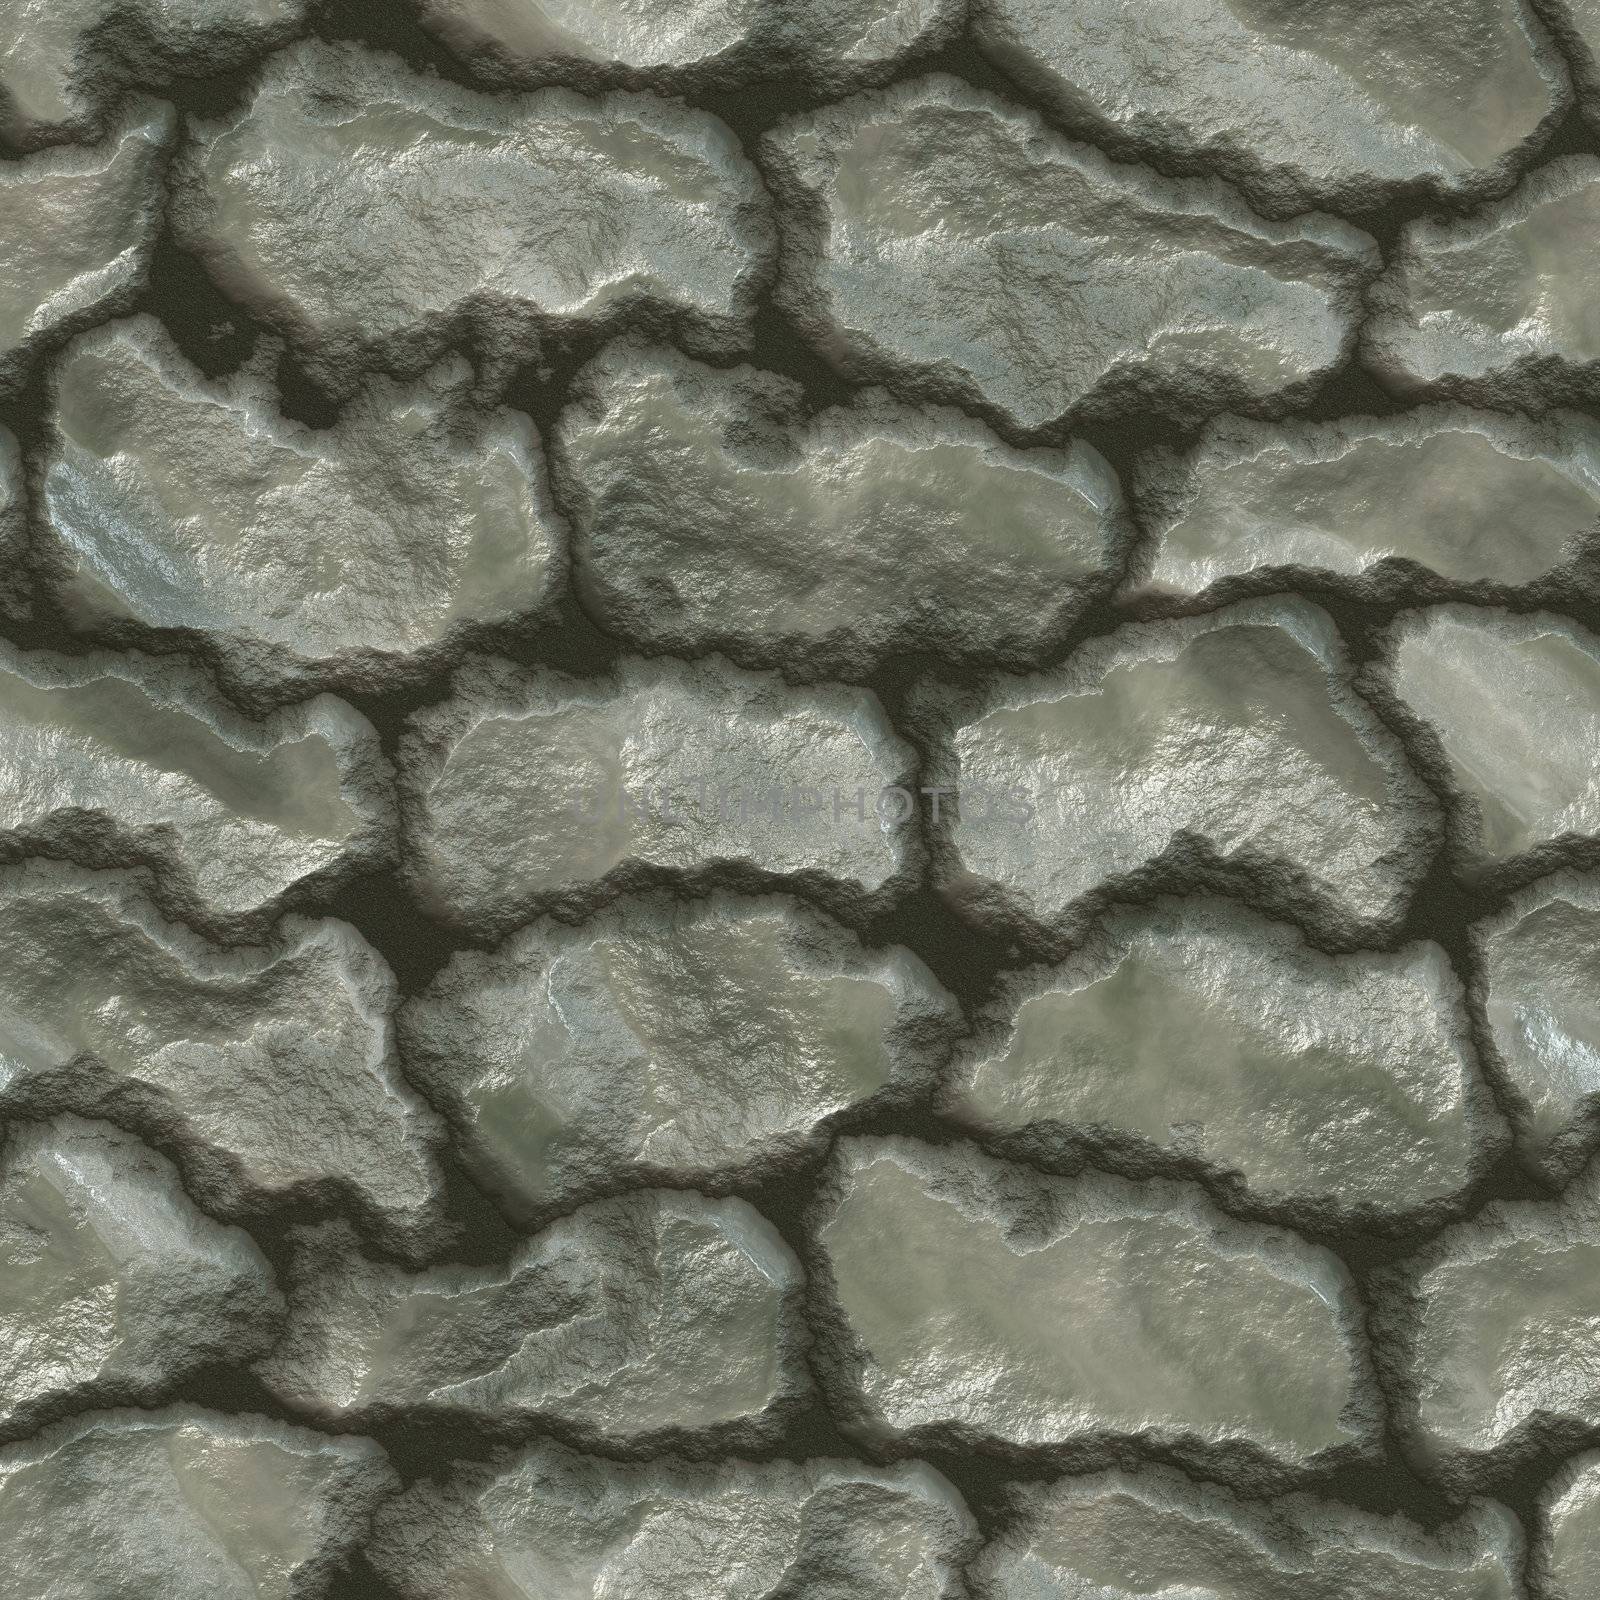 Stones in mortar seamless background